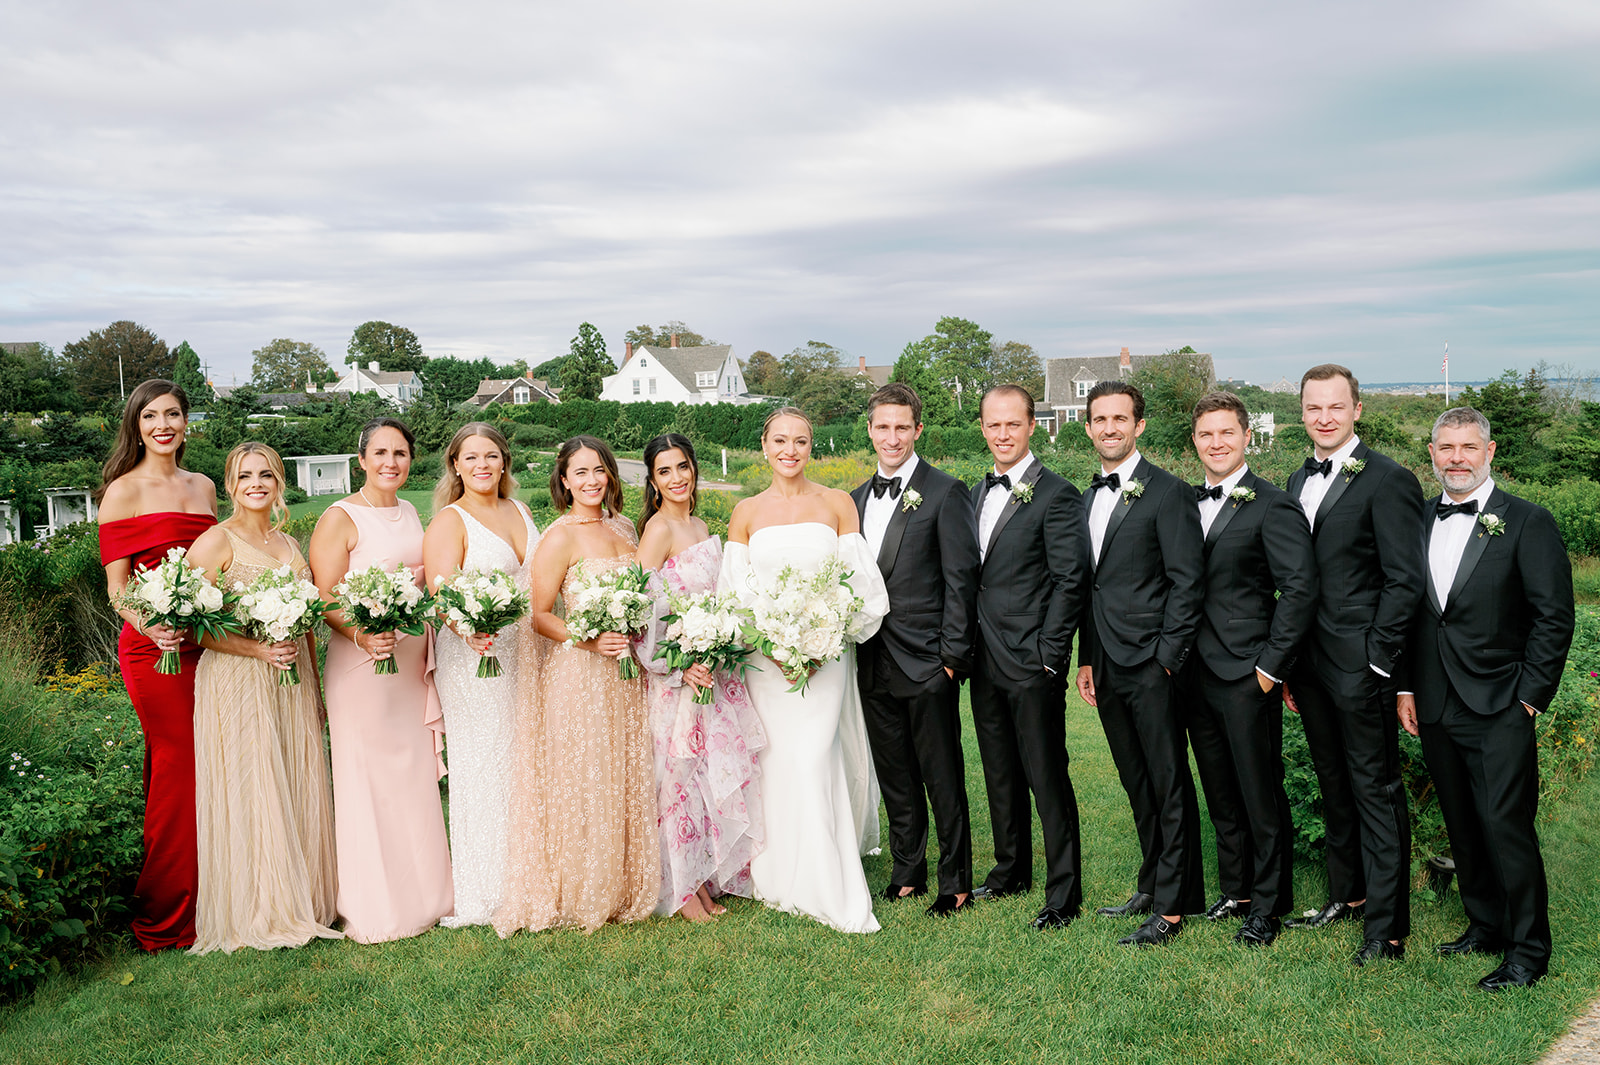 Romantic posed garden wedding party portrait with mismatched bridesmaid dresses and classic black groomsmen attire. 